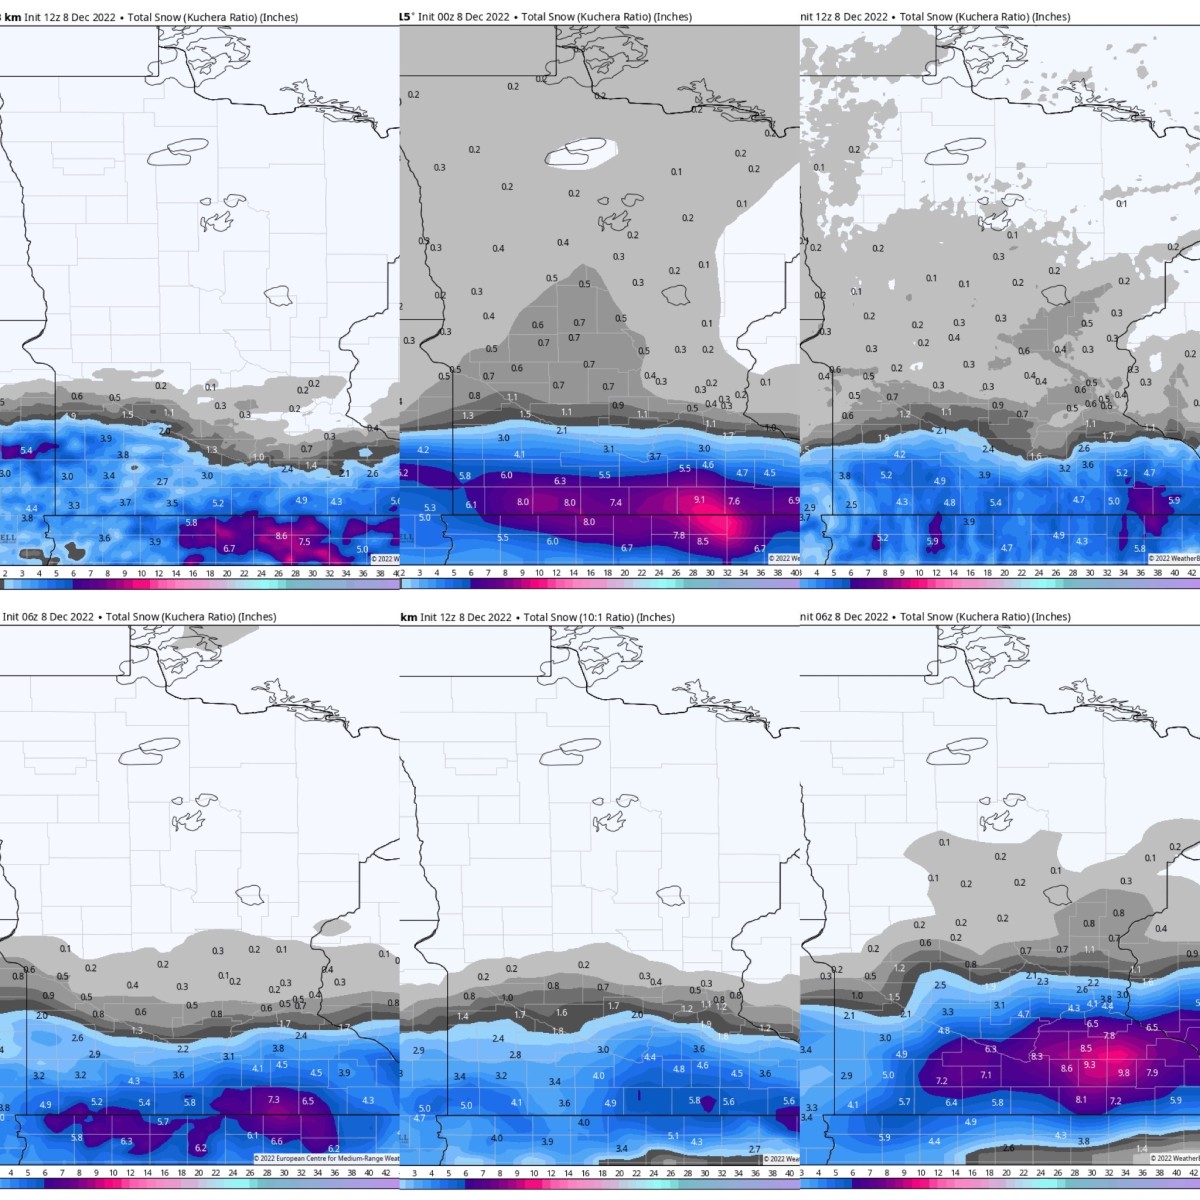 Different models are mostly aligned with the heaviest snow along the Minnesota-Iowa border. 